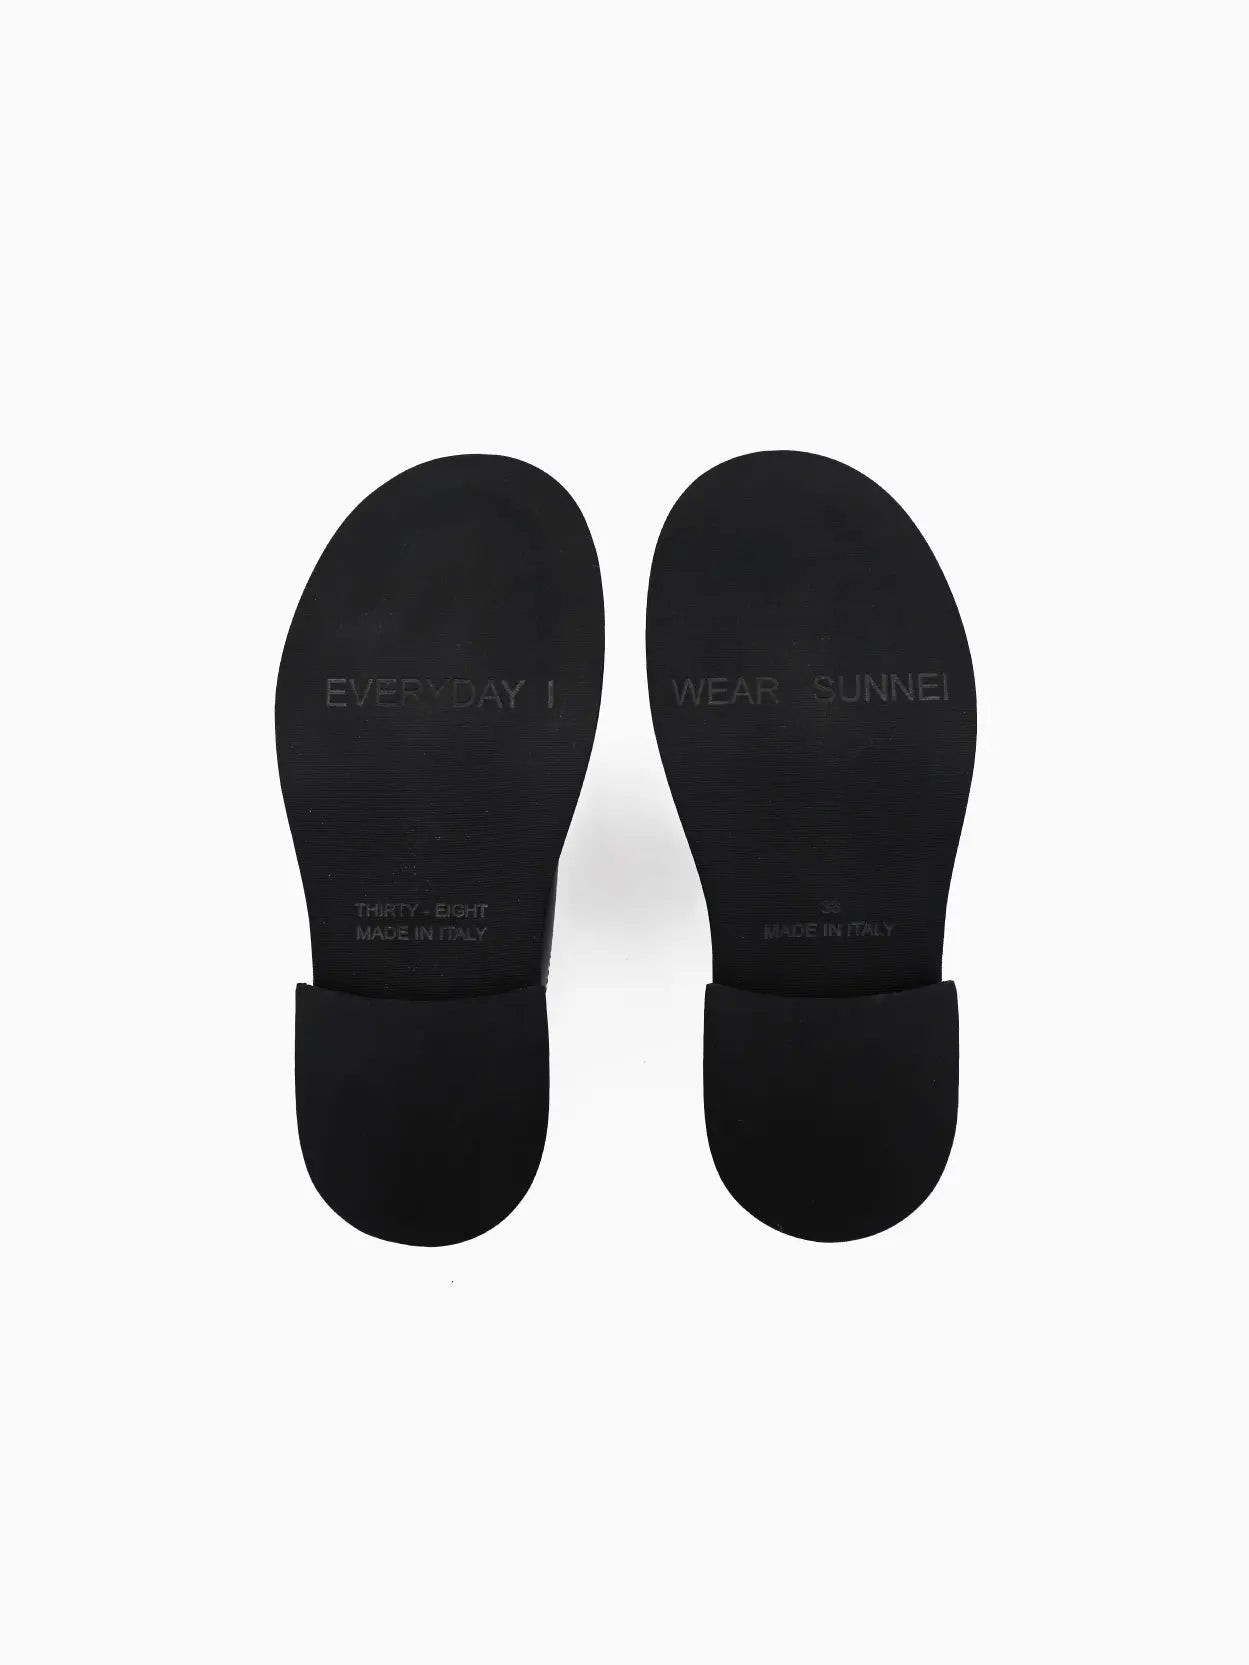 Image of a single black Sunnei Form Marg Black shoe viewed from the side, available at Bassalstore in Barcelona. The shoe features a rounded toe, a thick strap across the top with a velcro closure, and a chunky sole. The background is plain white.